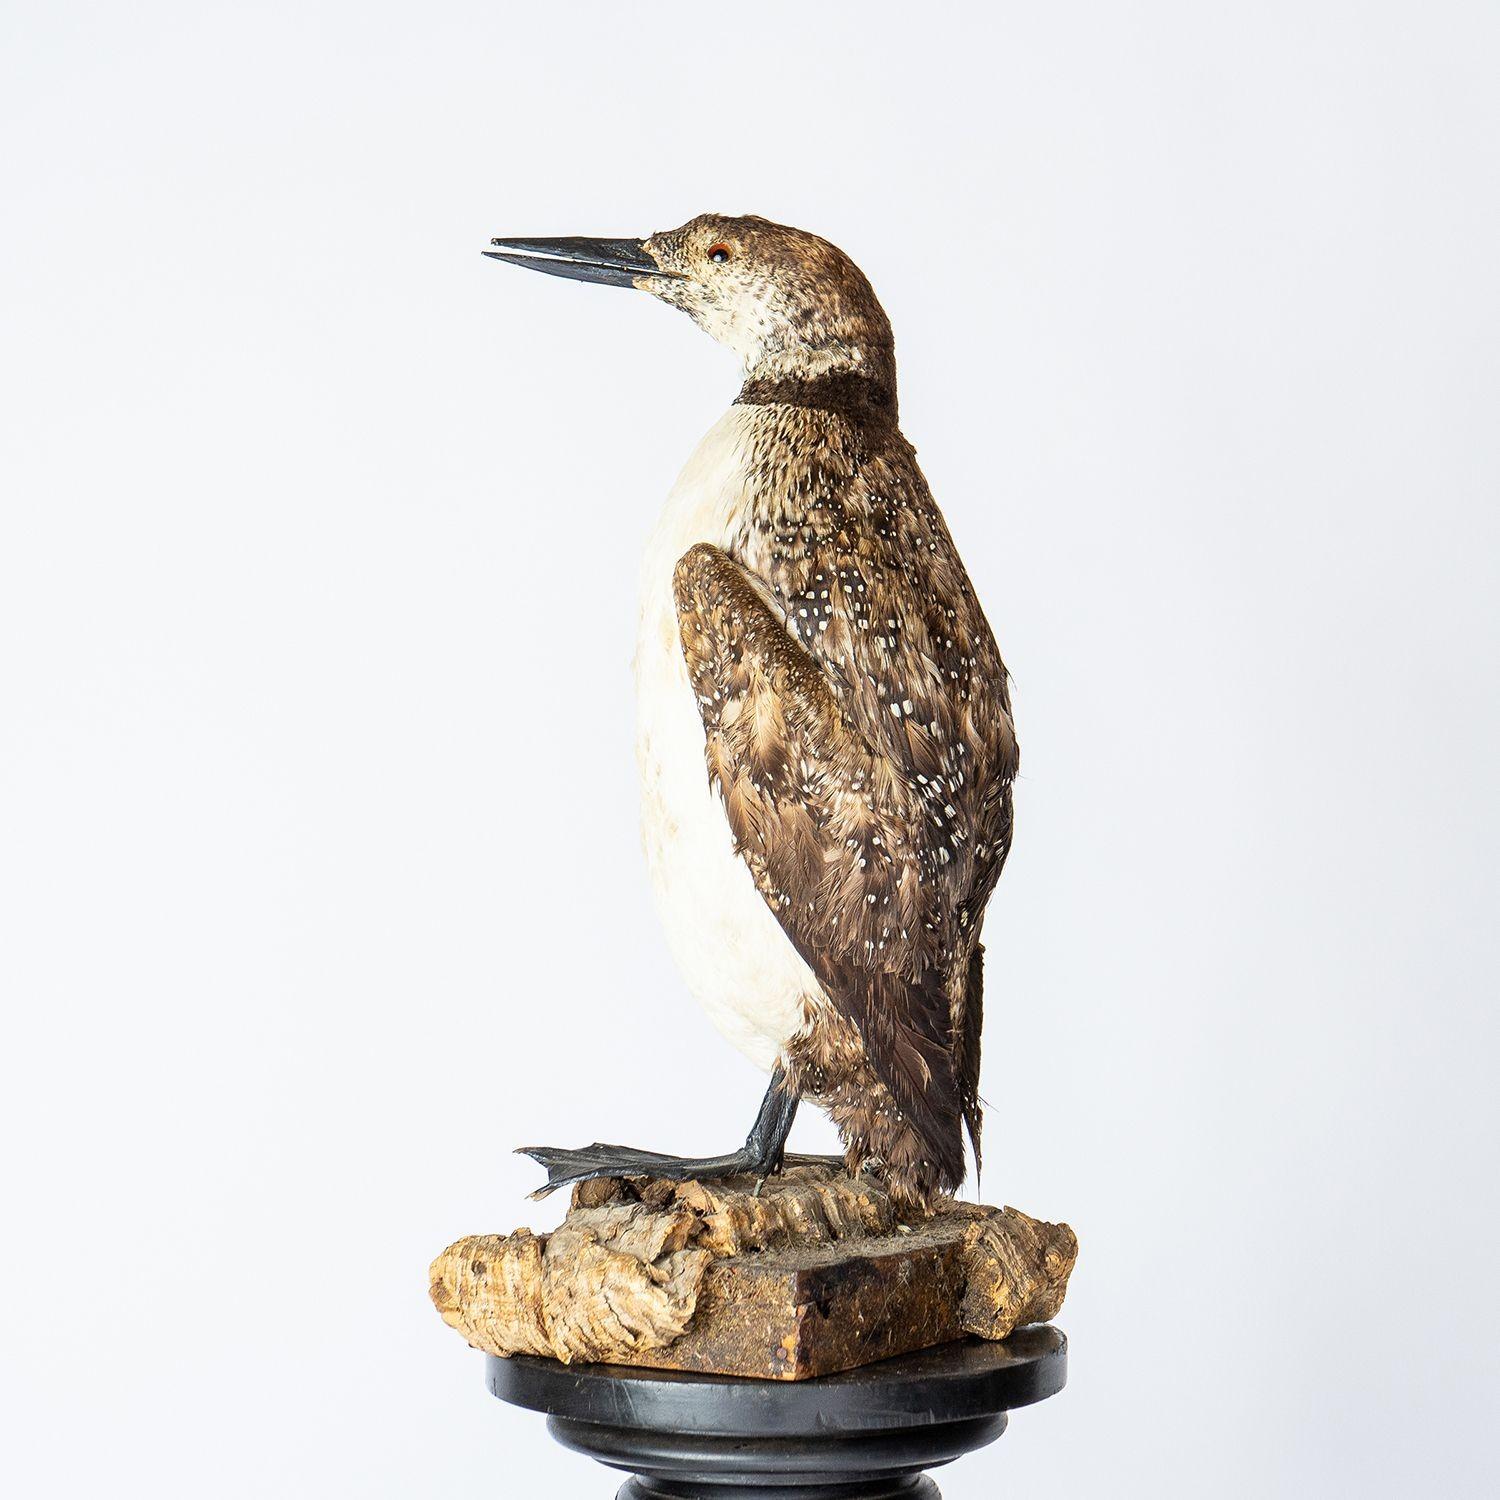 Antique Stuffed Aquatic Bird

After a few trips around the naturalistic community, we have settled on a loon. Mounted somewhat like a penguin a tad more upright and plump than in the wild this non-breeding adult loon (diver) has a wonderful